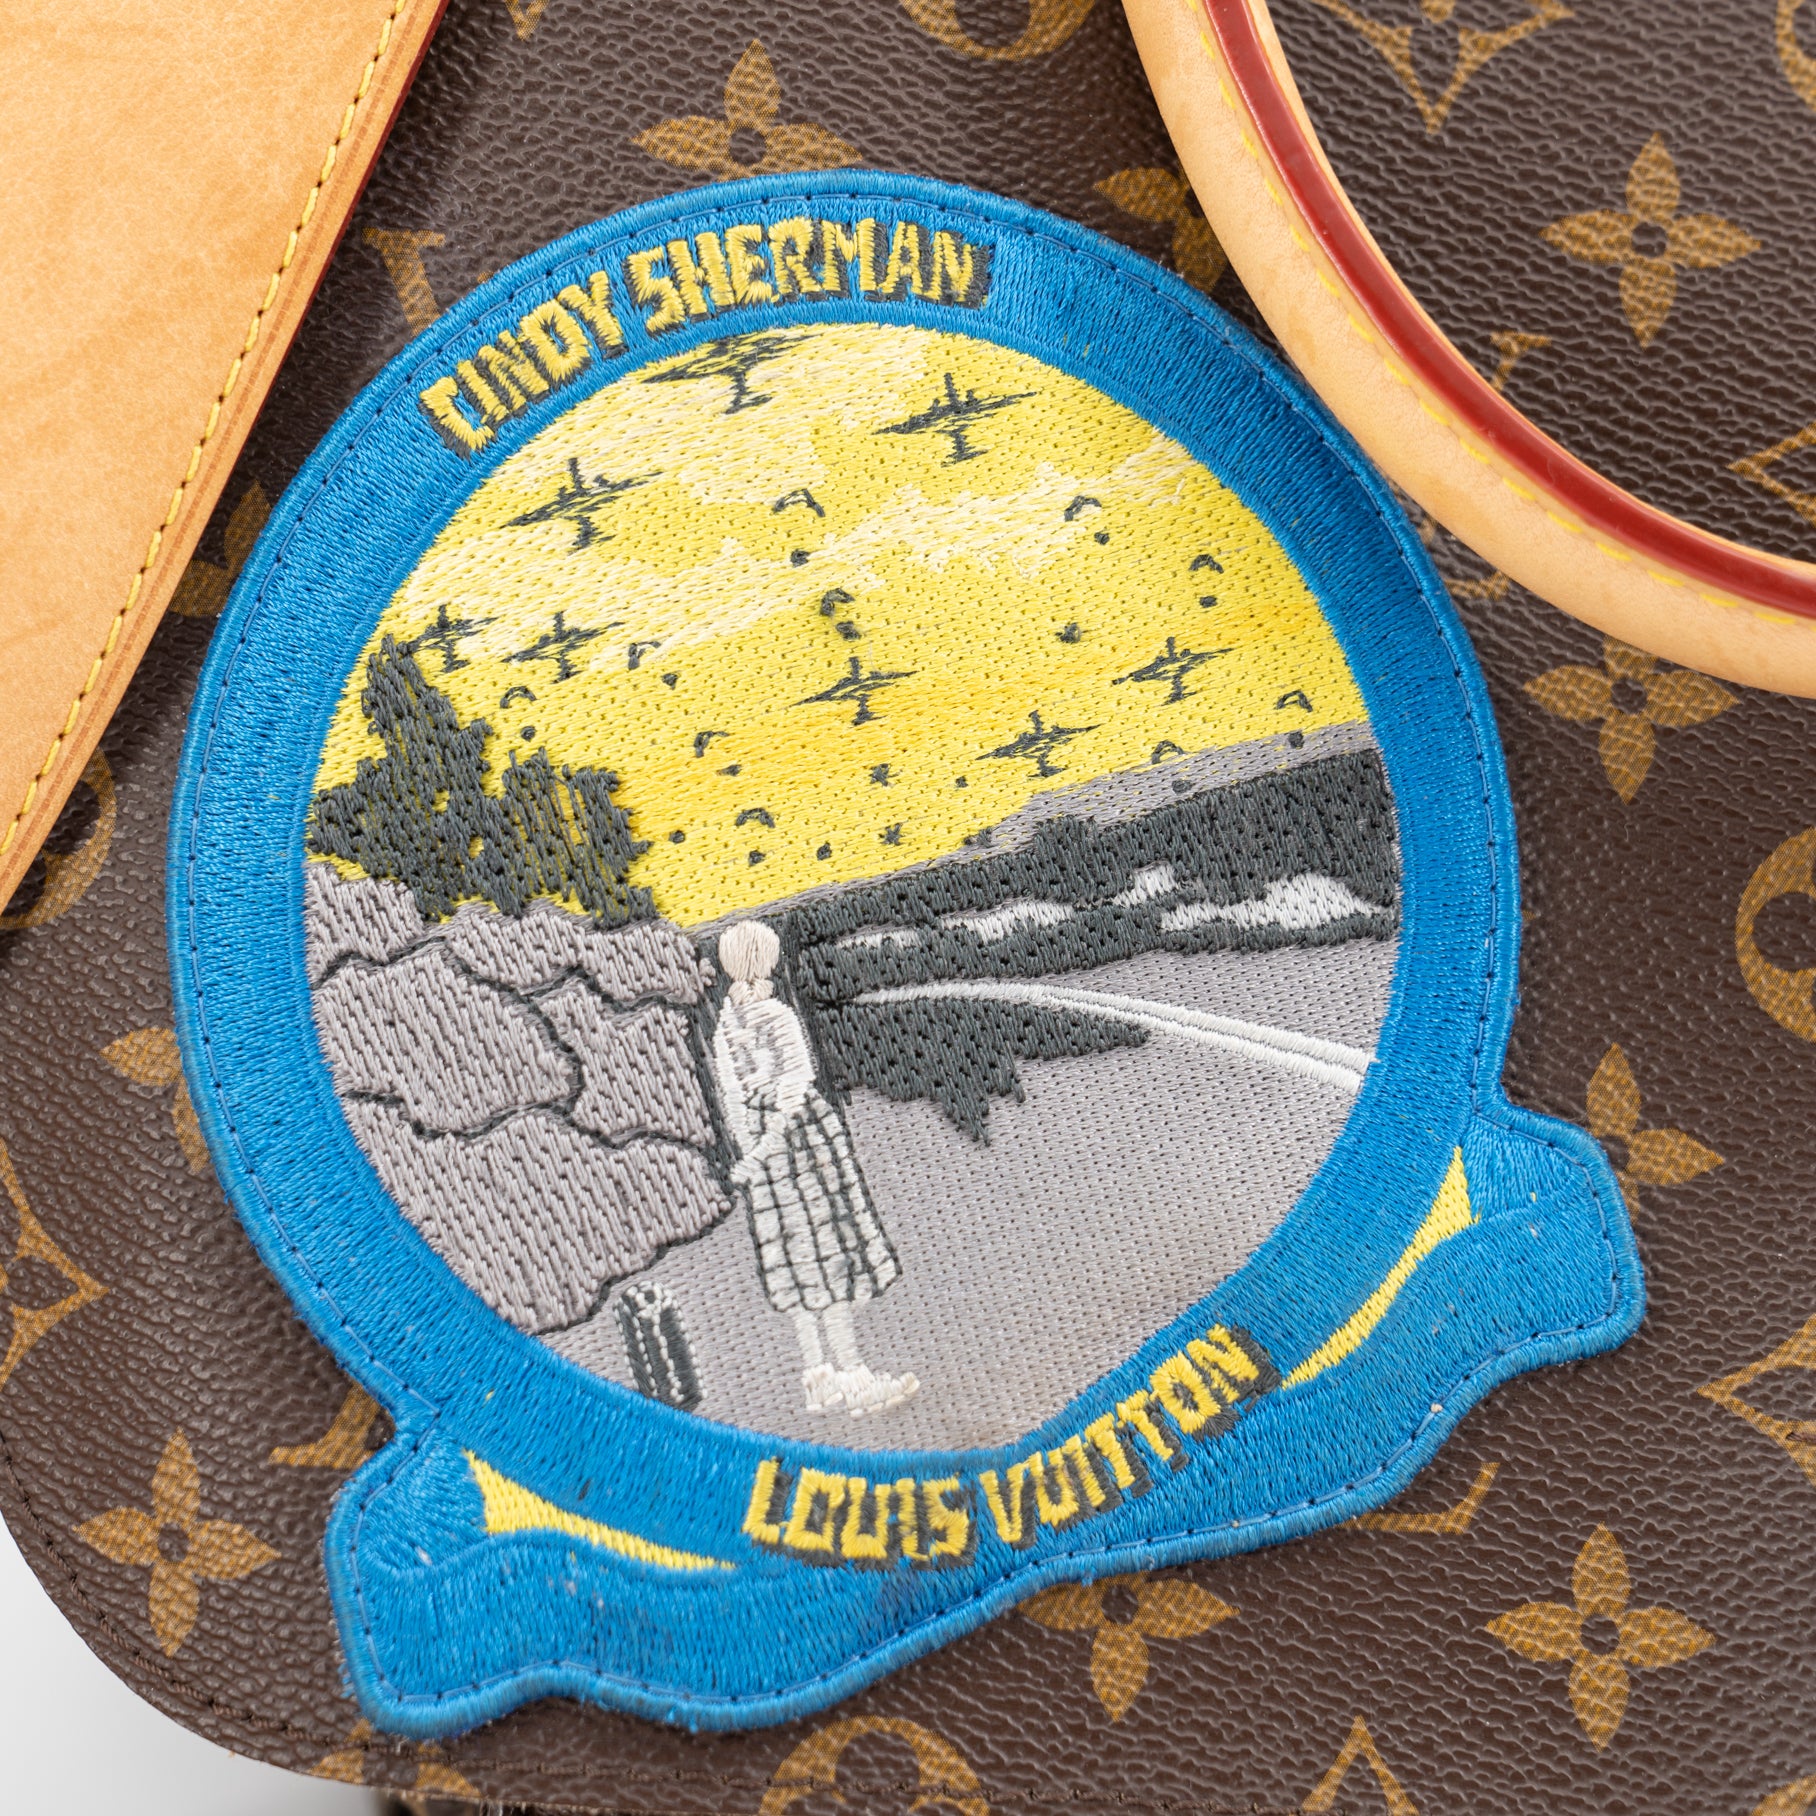 Attention-grabbing accessory: The Louis Vuitton Cindy Sherman